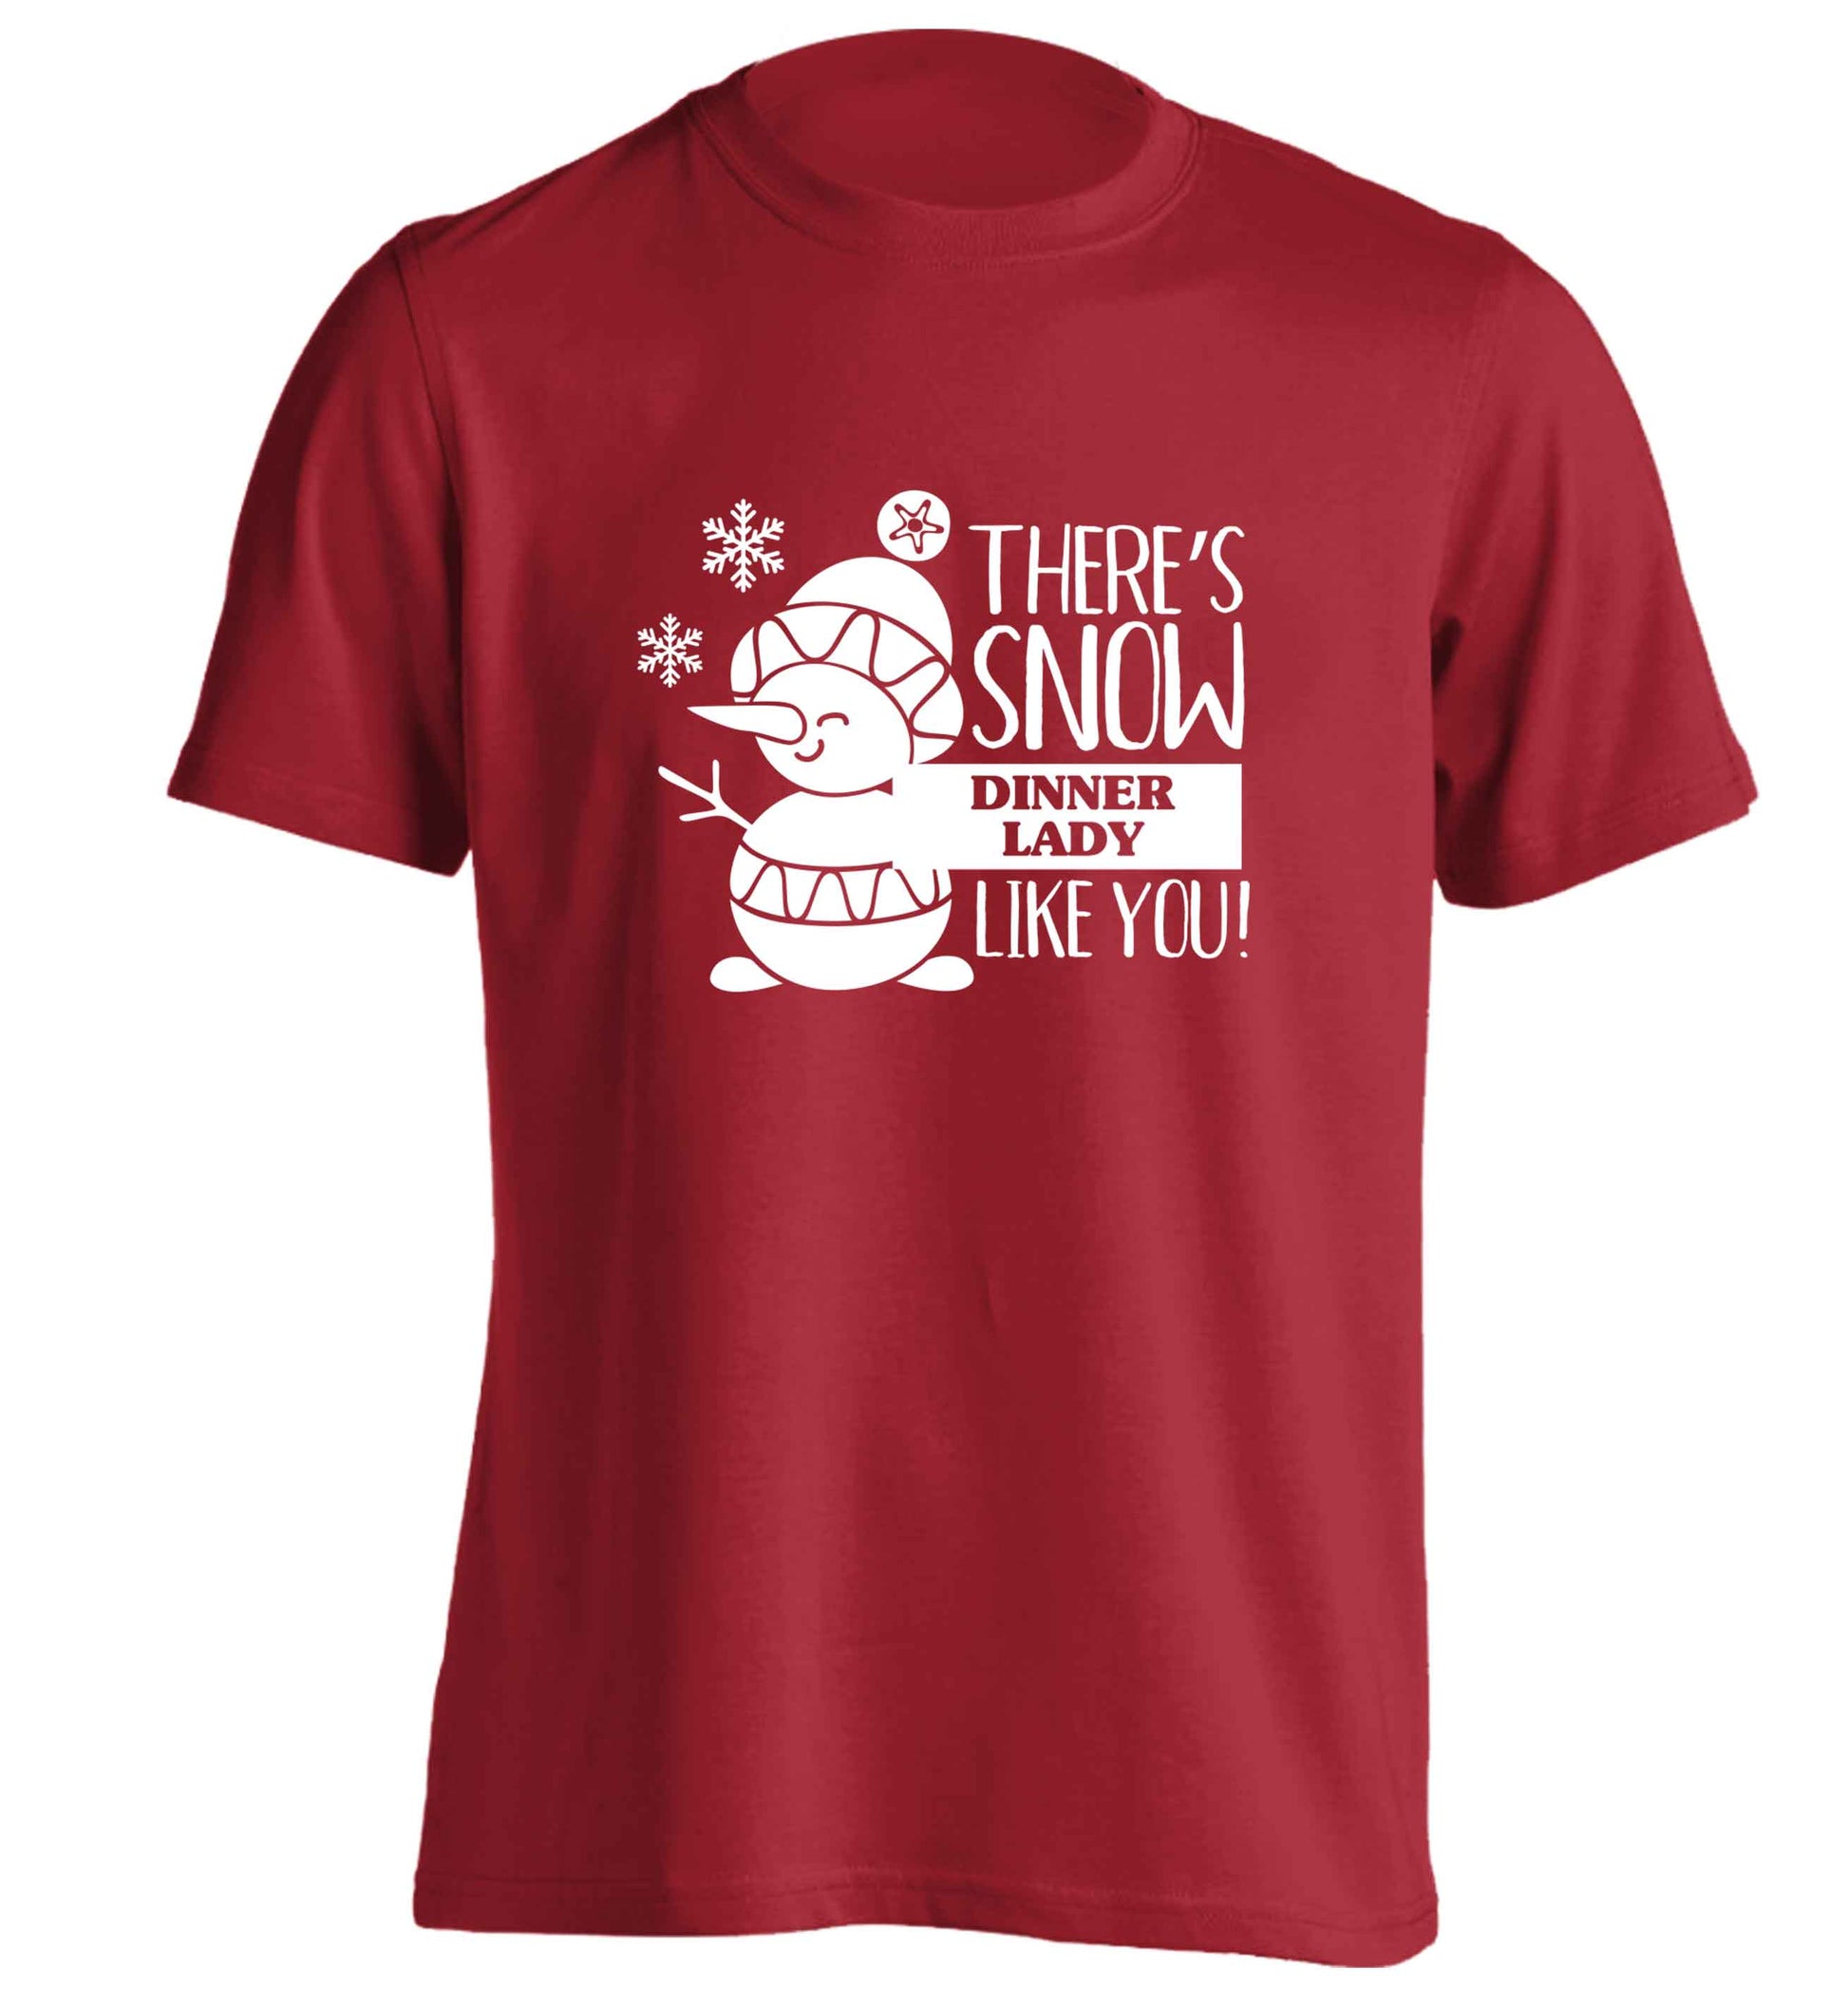 There's snow dinner lady like you adults unisex red Tshirt 2XL